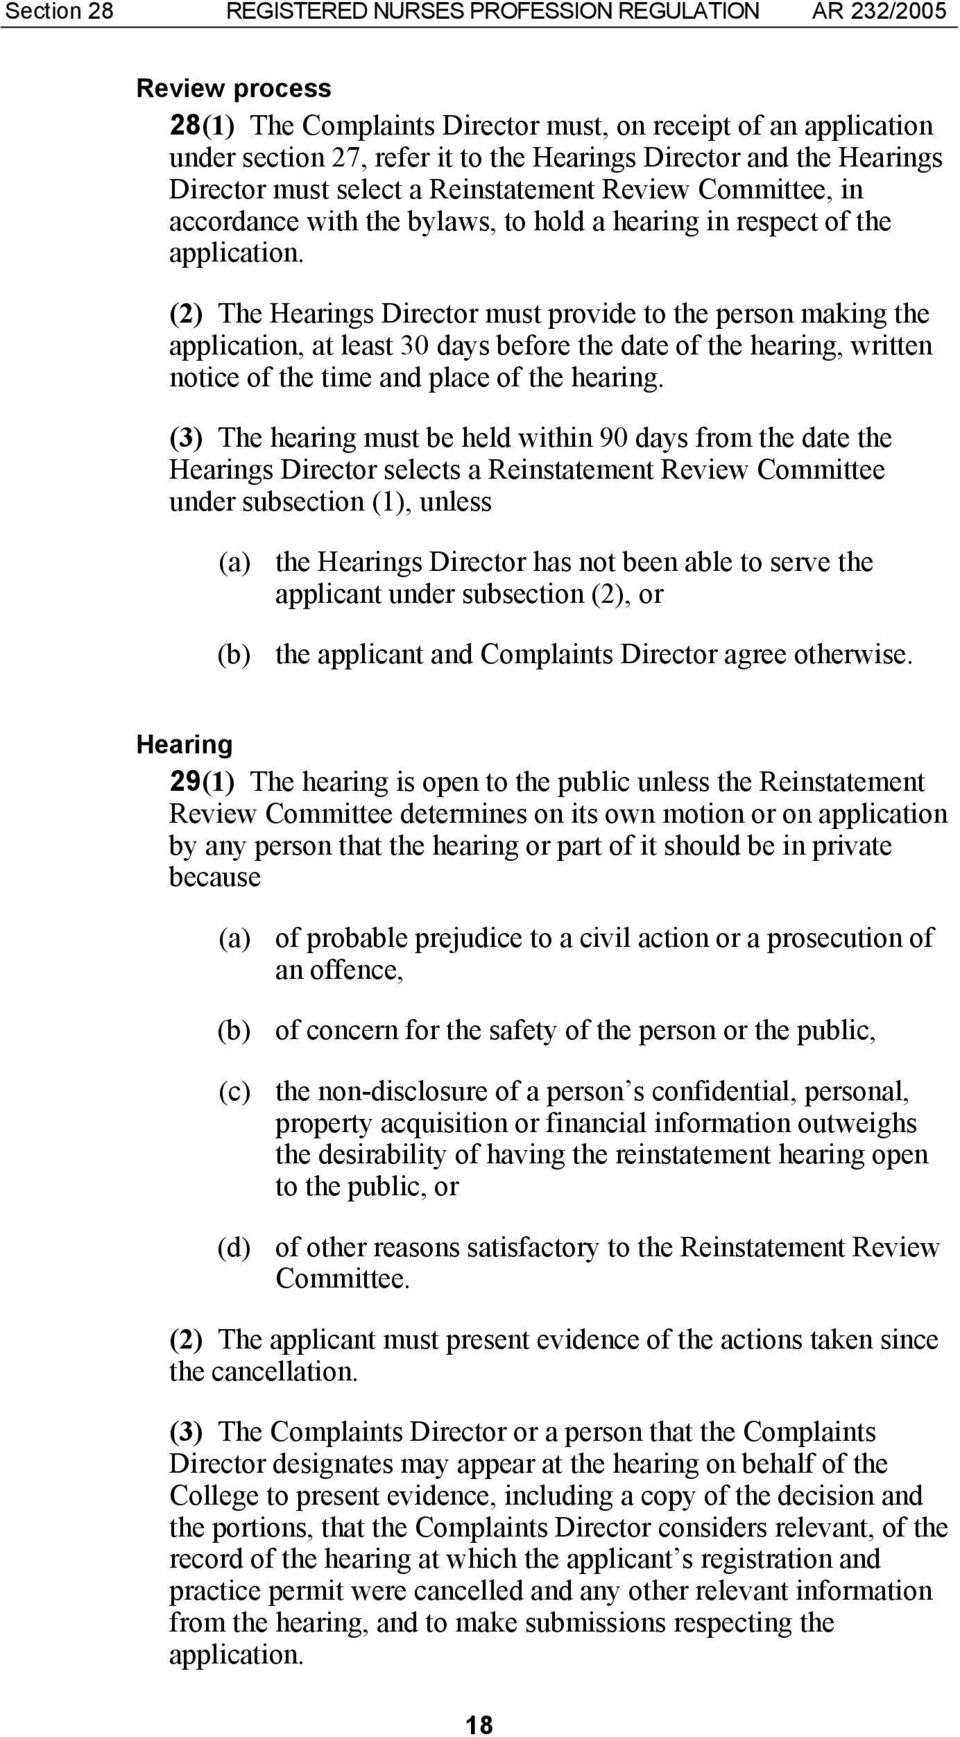 (2) The Hearings Director must provide to the person making the application, at least 30 days before the date of the hearing, written notice of the time and place of the hearing.